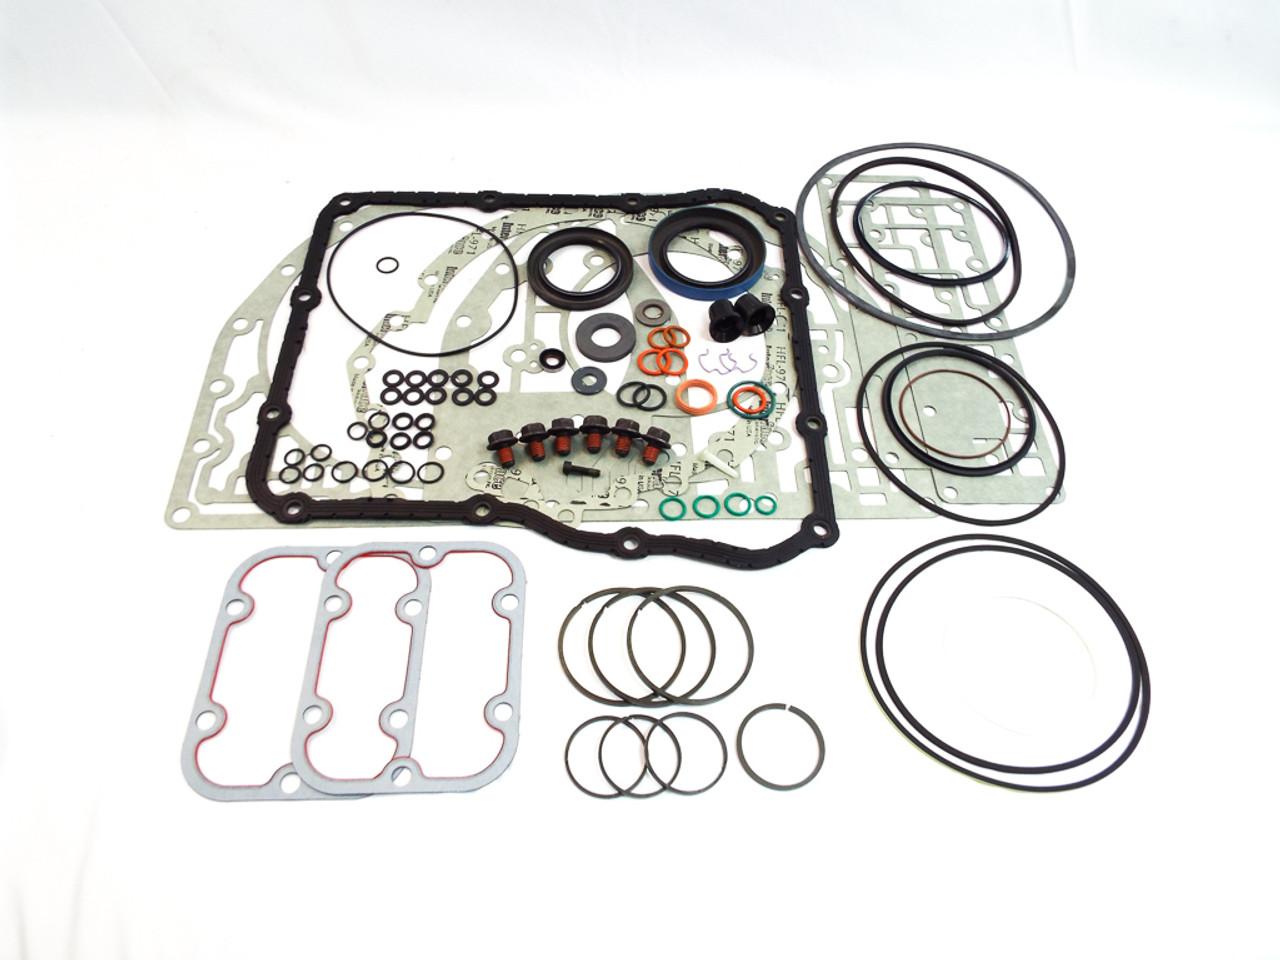 The best collection of OE quality gaskets, seals, o-rings and other soft parts for the Allison 1000/2000/2400 series of automatic transmissions.